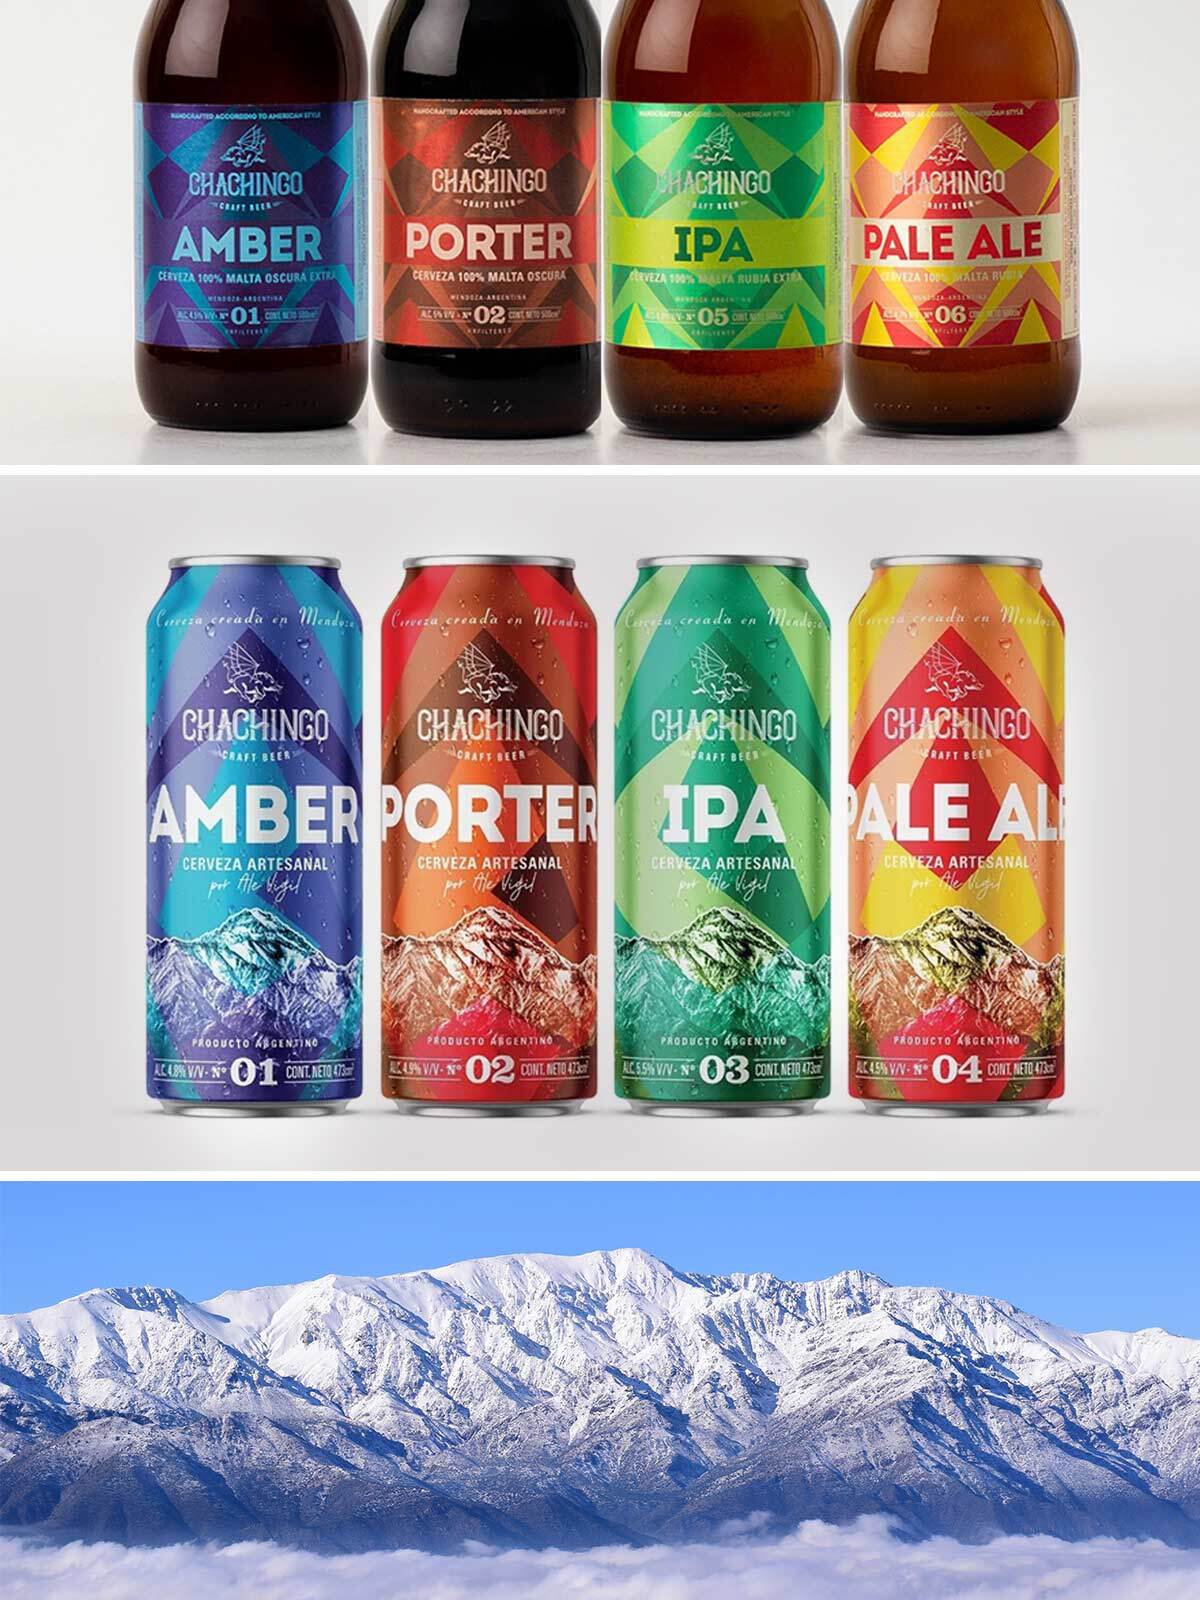 imaginity_chachingo-beer_packaging-design_bottles-cans